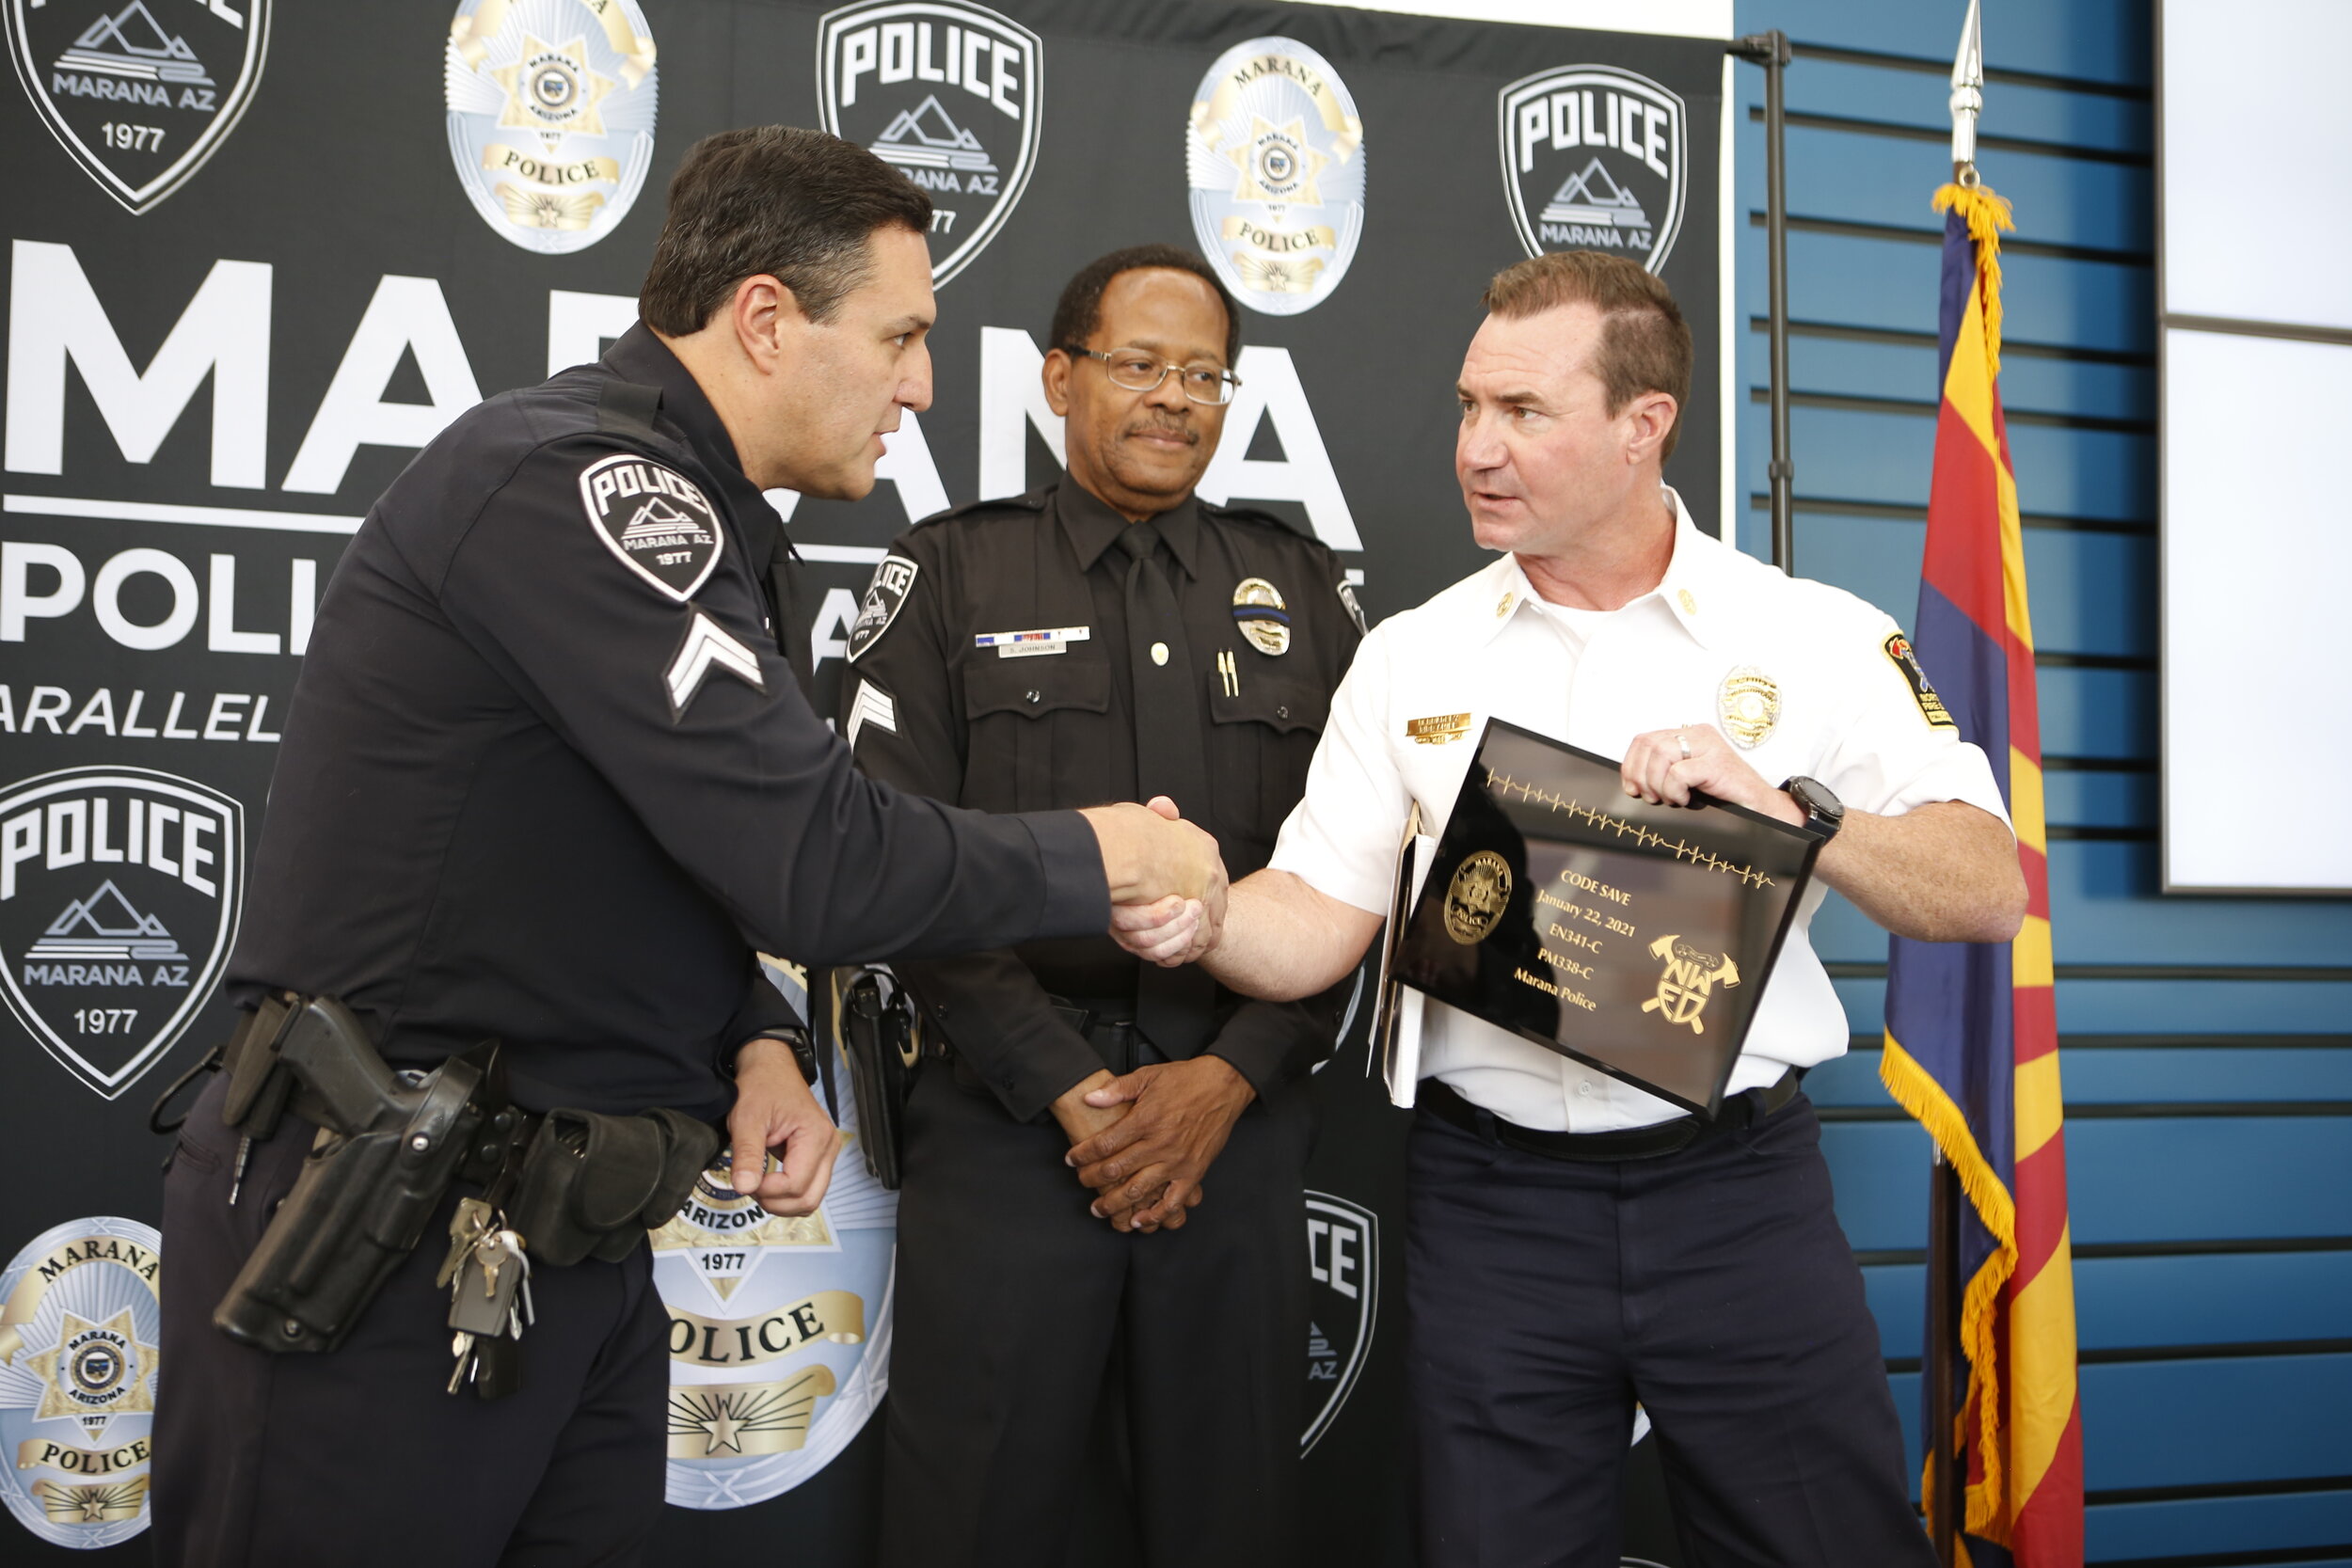  Northwest Fire presented Officer Cabrera (left) and Sergeant Johnson (center) with a plaque for the Lifesaving Award 